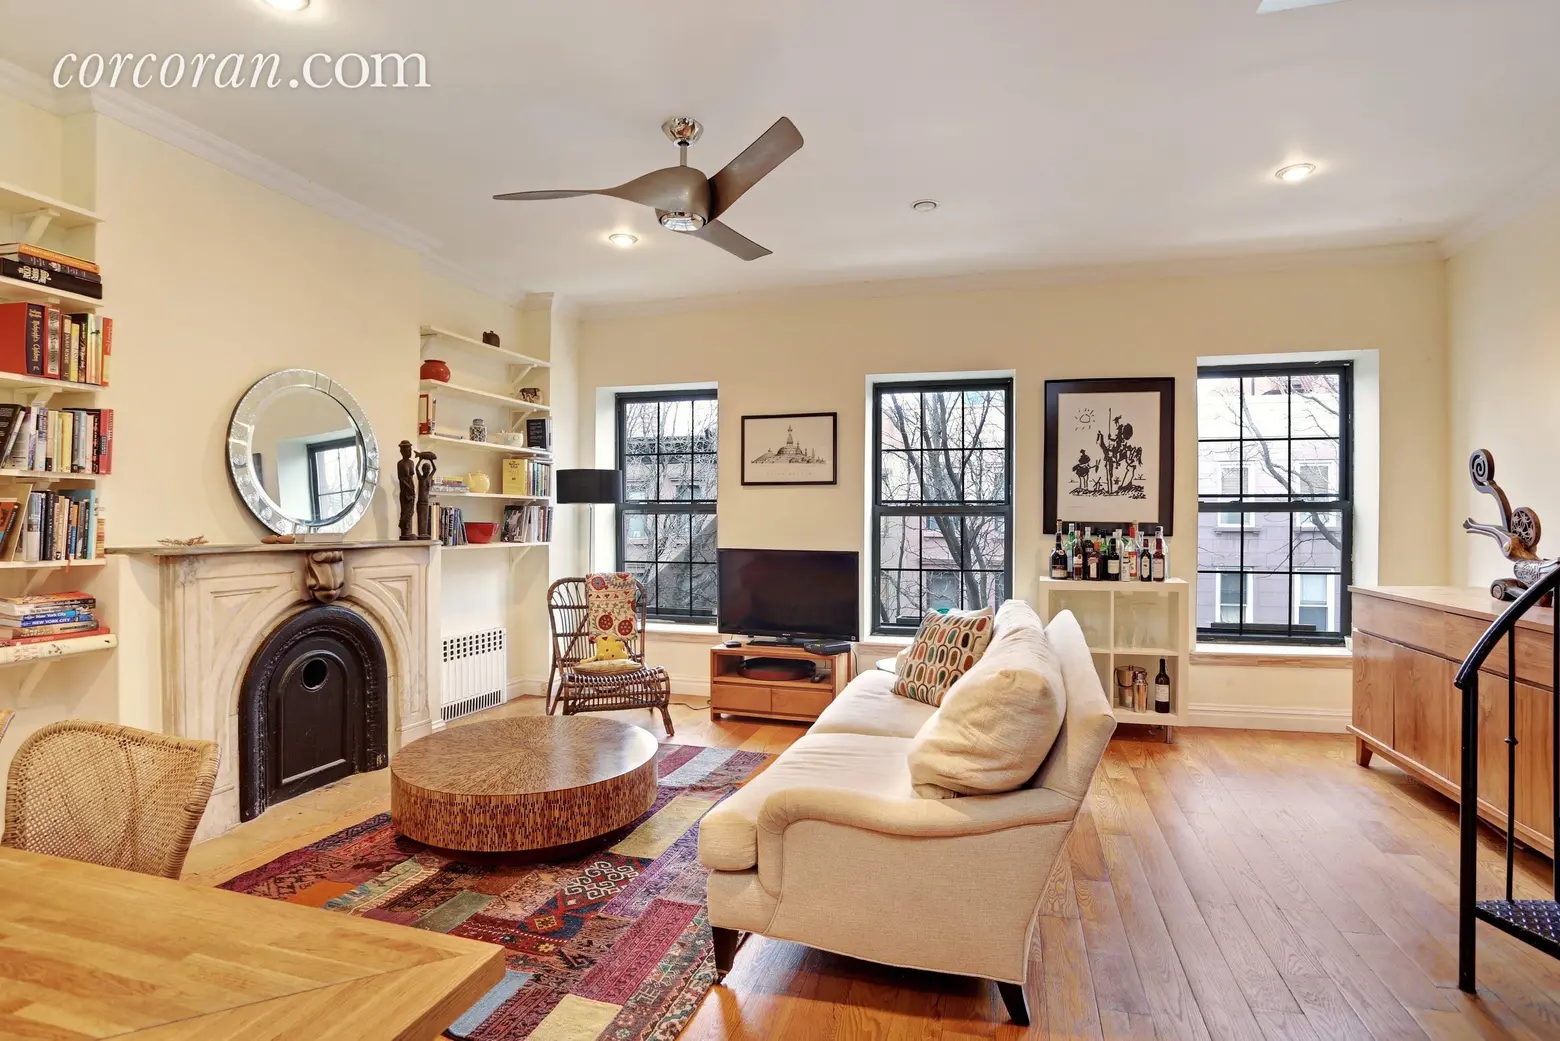 Park Slope Duplex With Spiral Staircase and Private Roof Deck Asks $6,500 a Month